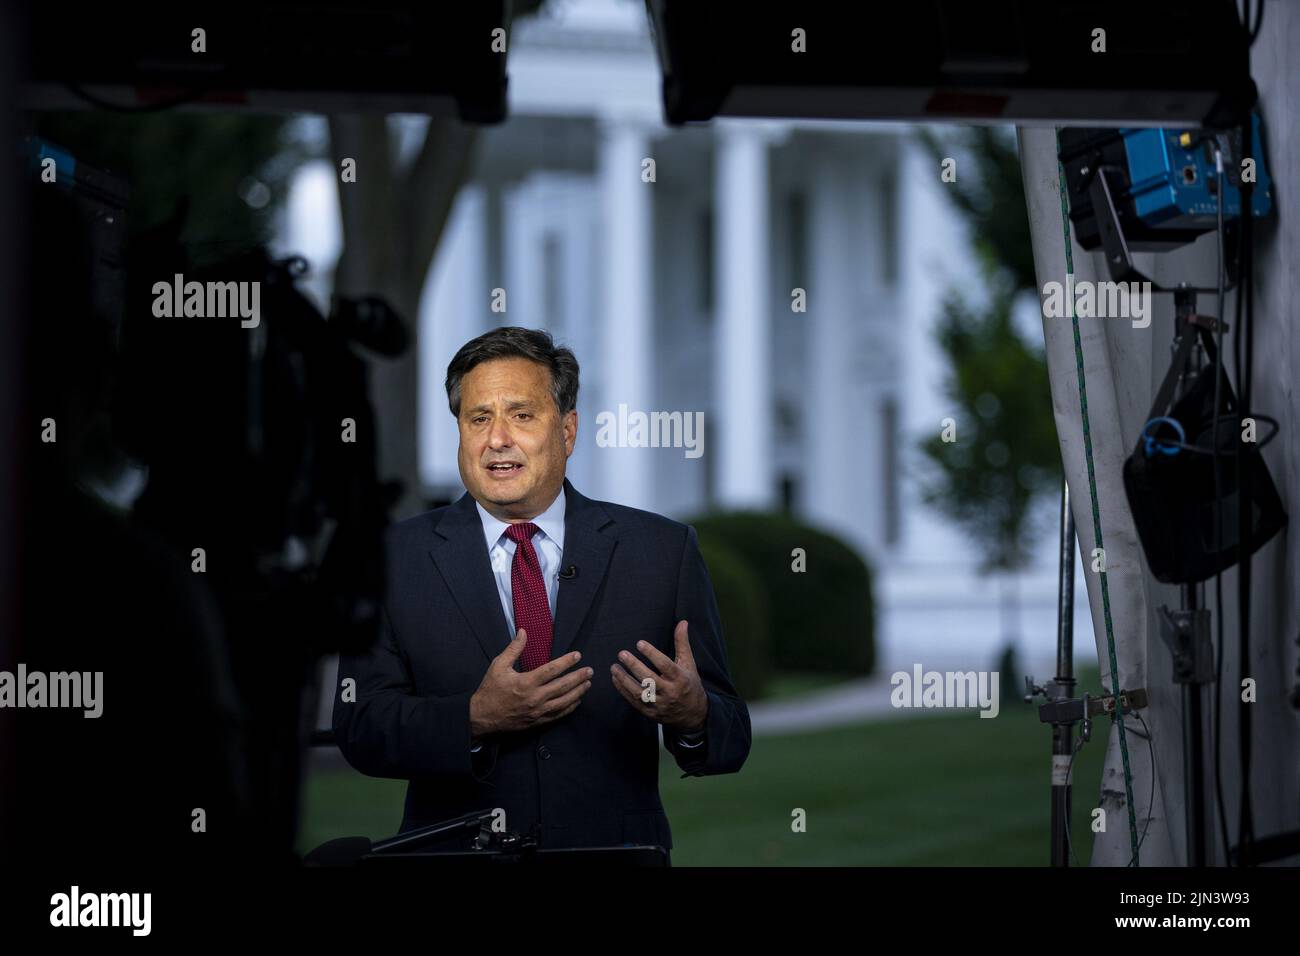 Washington, United States. 08th Aug, 2022. Ron Klain, White House chief of staff, speaks during a television interview on the North Lawn of the White House in Washington, DC on Monday, August 8, 2022. Biden resumed official travel today for the first time since his bout with Covid-19, traveling to Kentucky to show federal support for the state's recovery from historic flooding and to console survivors of the devastation. Photo by Al Drago/UPI Credit: UPI/Alamy Live News Stock Photo